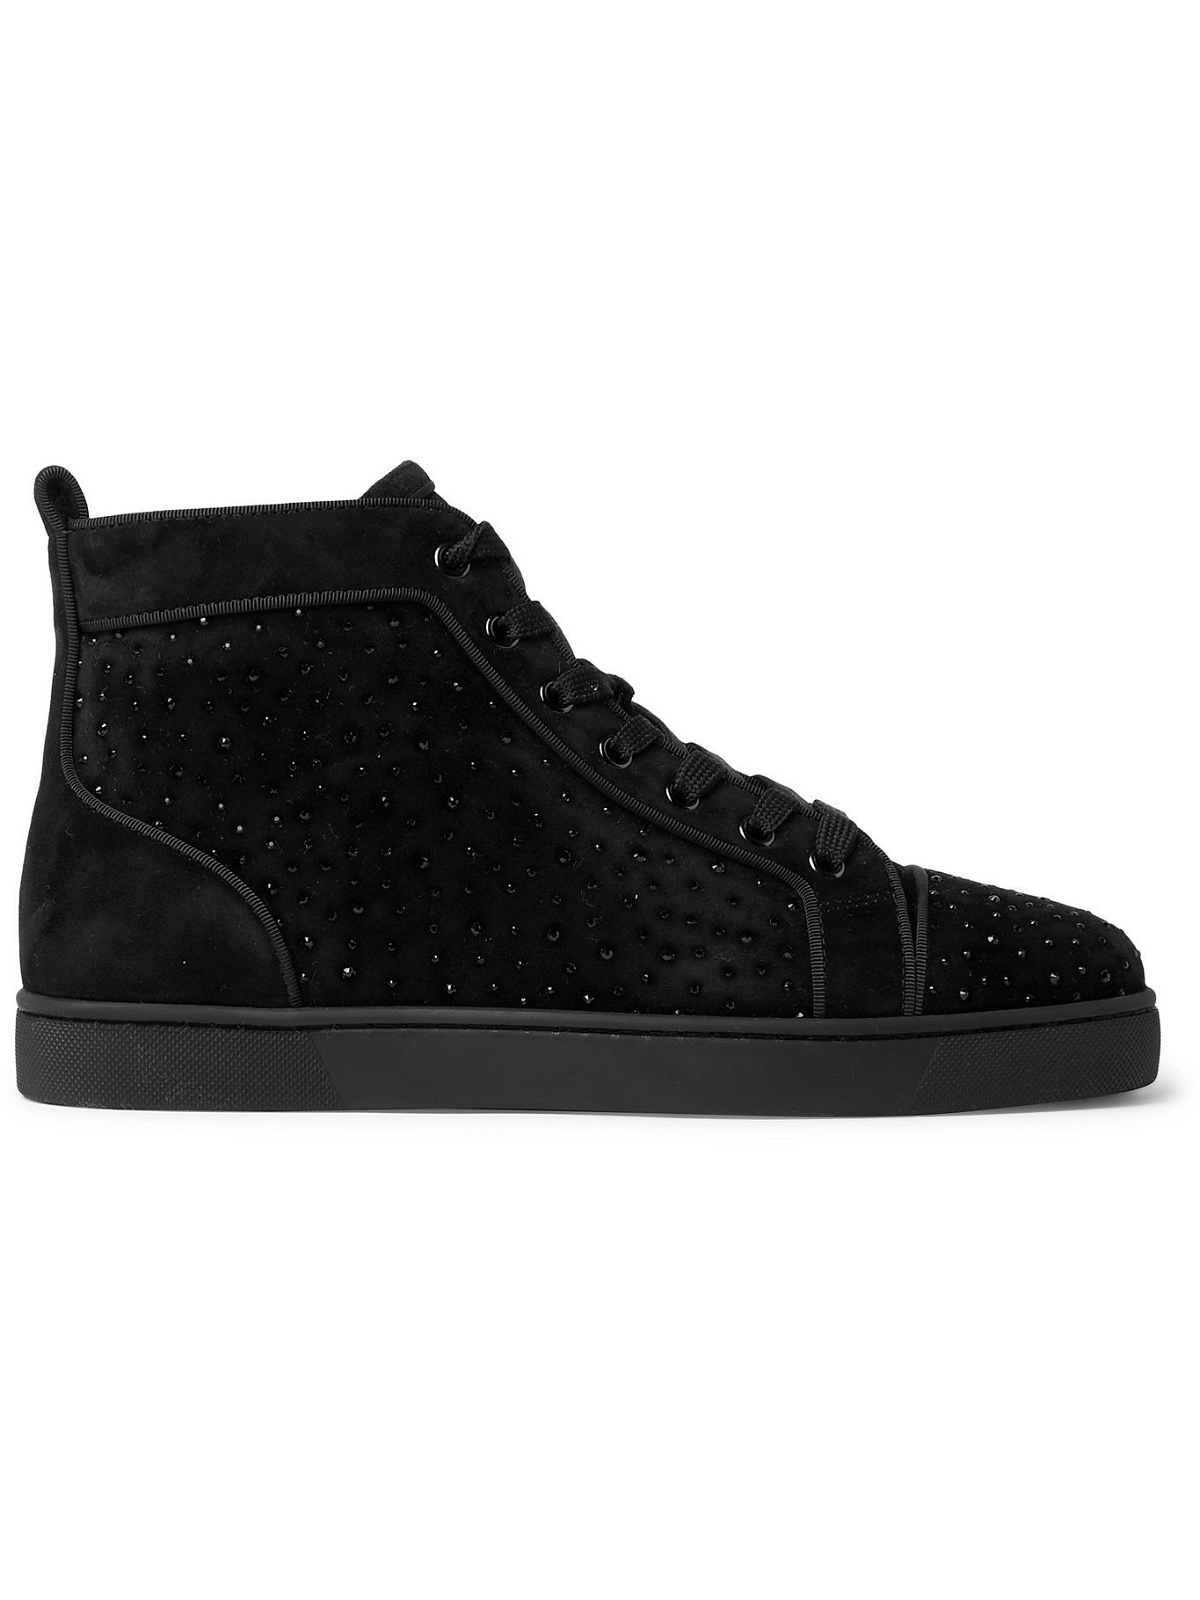 Christian Louboutin - Louis Suede High-Top Trainers - Mens - Black